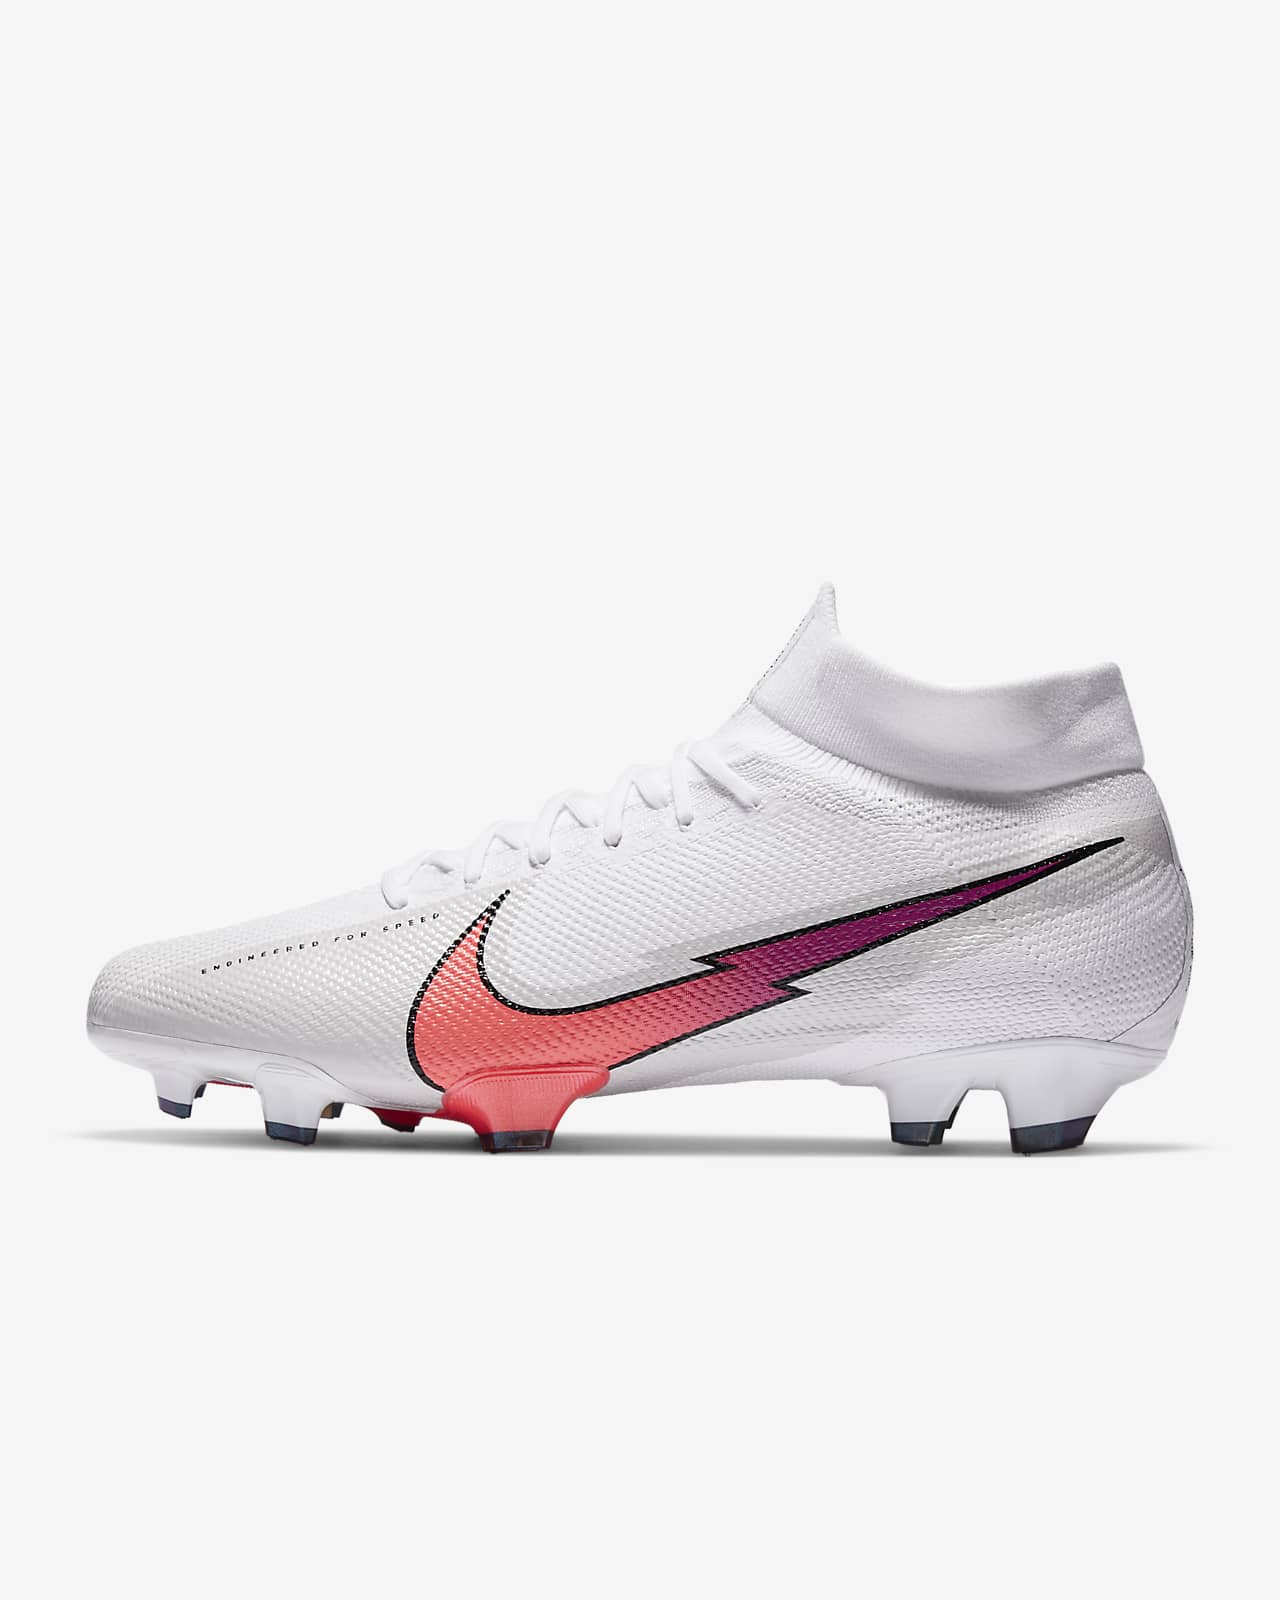 mercurial superfly 13 pro